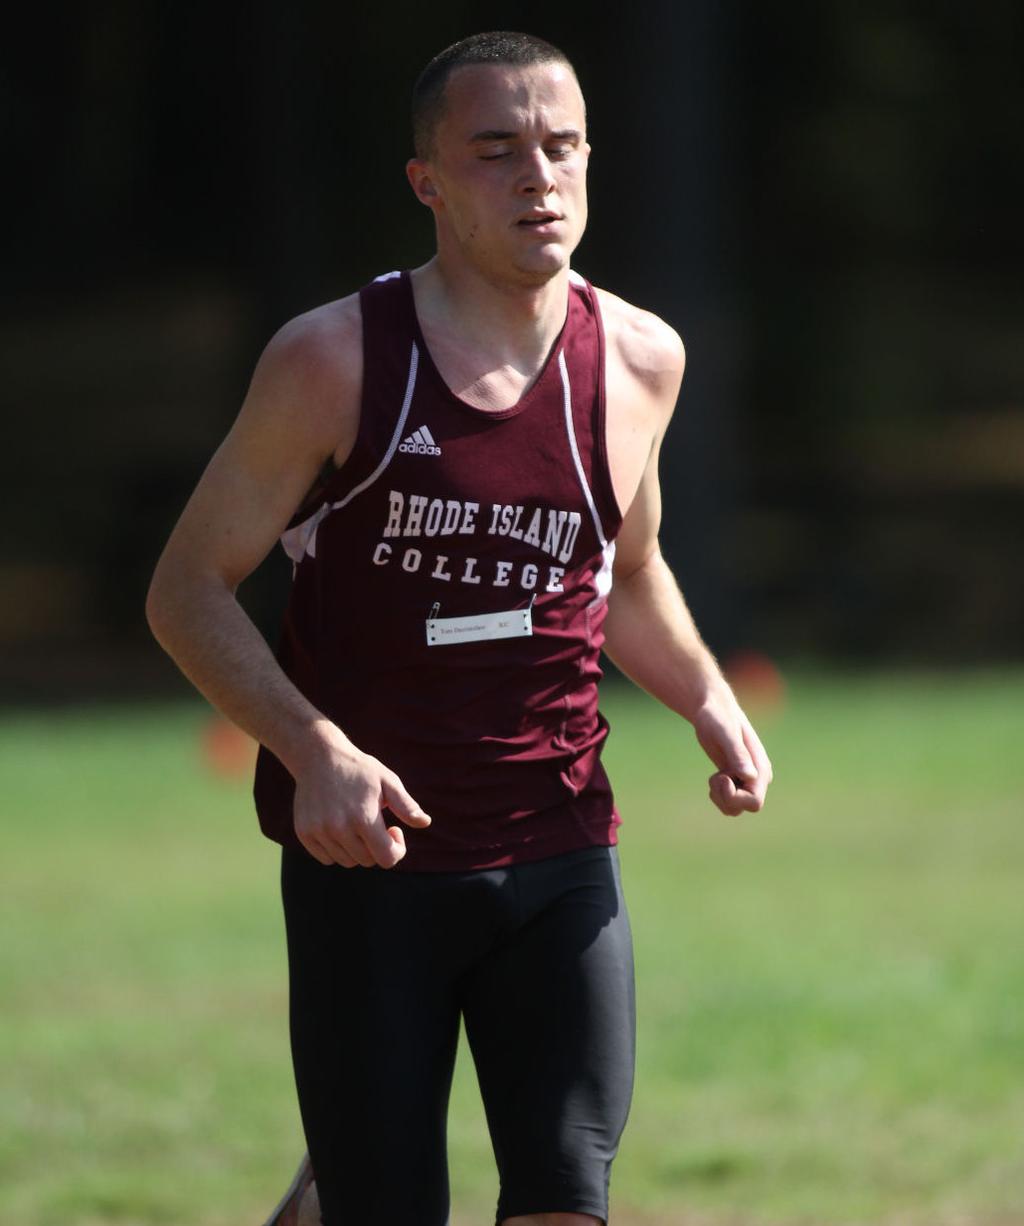 ..placed 134th with a time of 29:59.01 at the James Earley Invitational on Oct. 8...placed 75th with a time of 30:35 at the Pop Crowell Invitational on Oct. 1...placed 20th with a time of 32:00 at the Elms College Invitational on Sept.